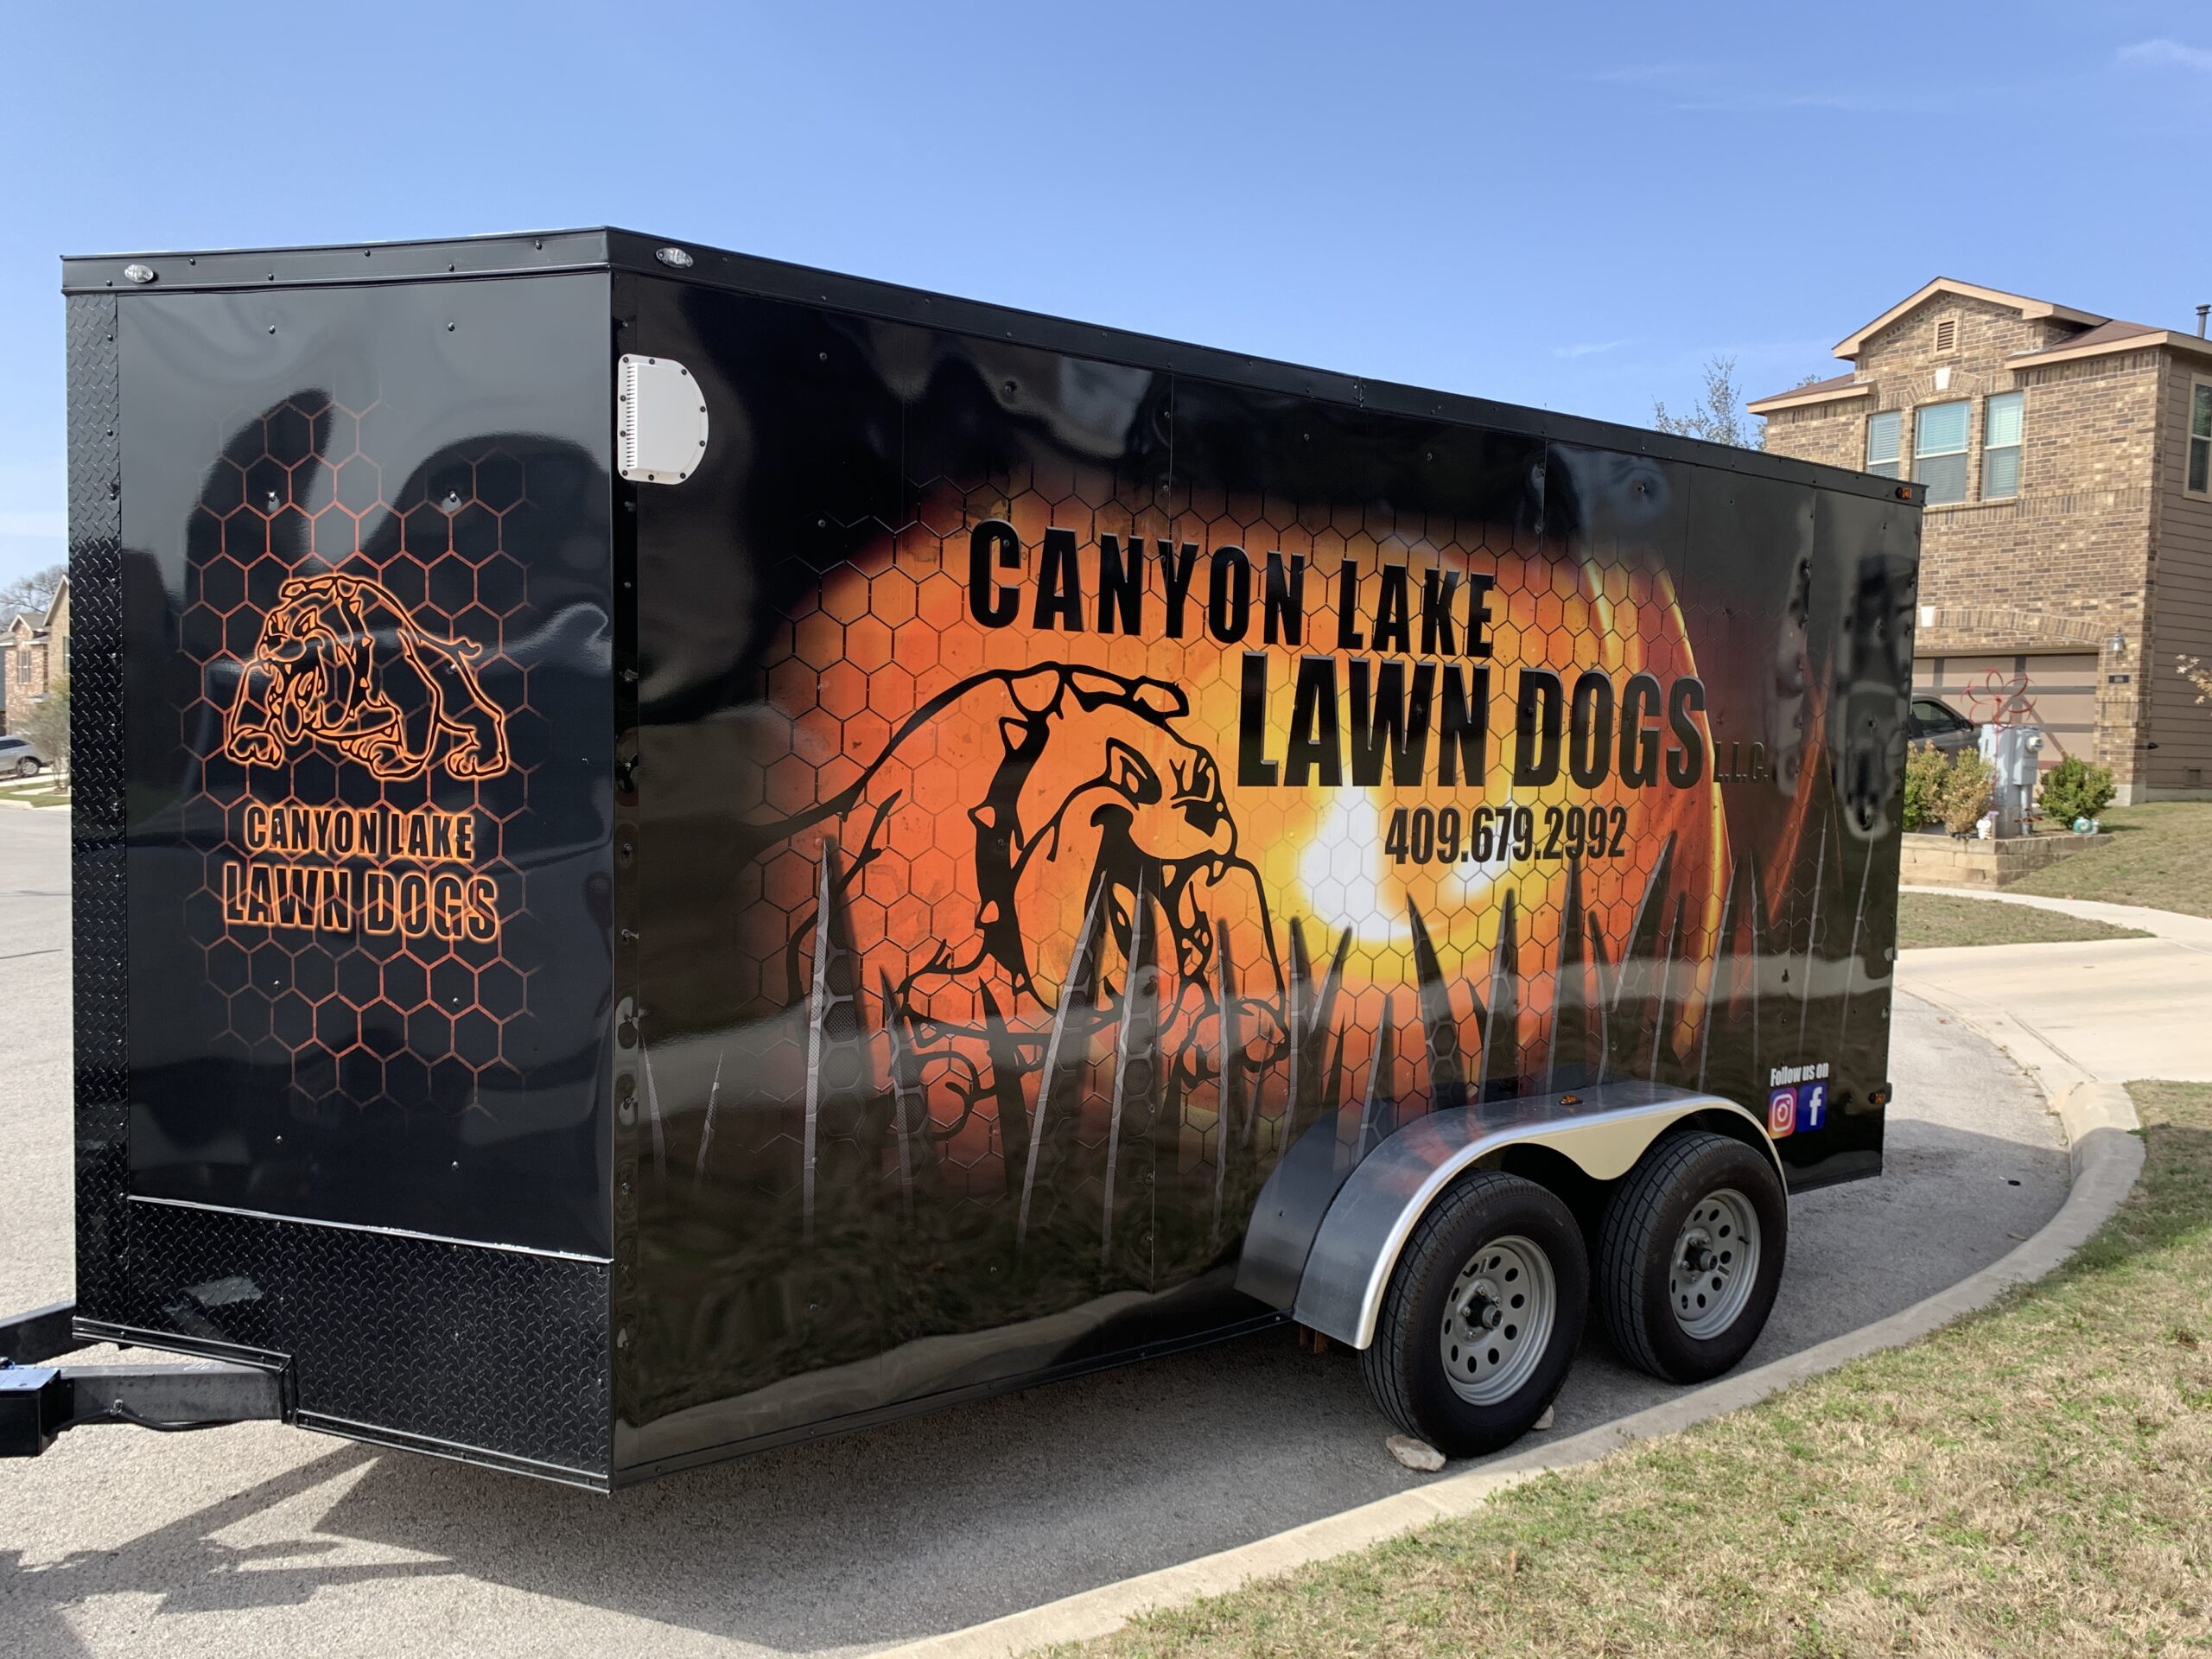 Full vinyl vehicle wrap on entire enclosed trailer